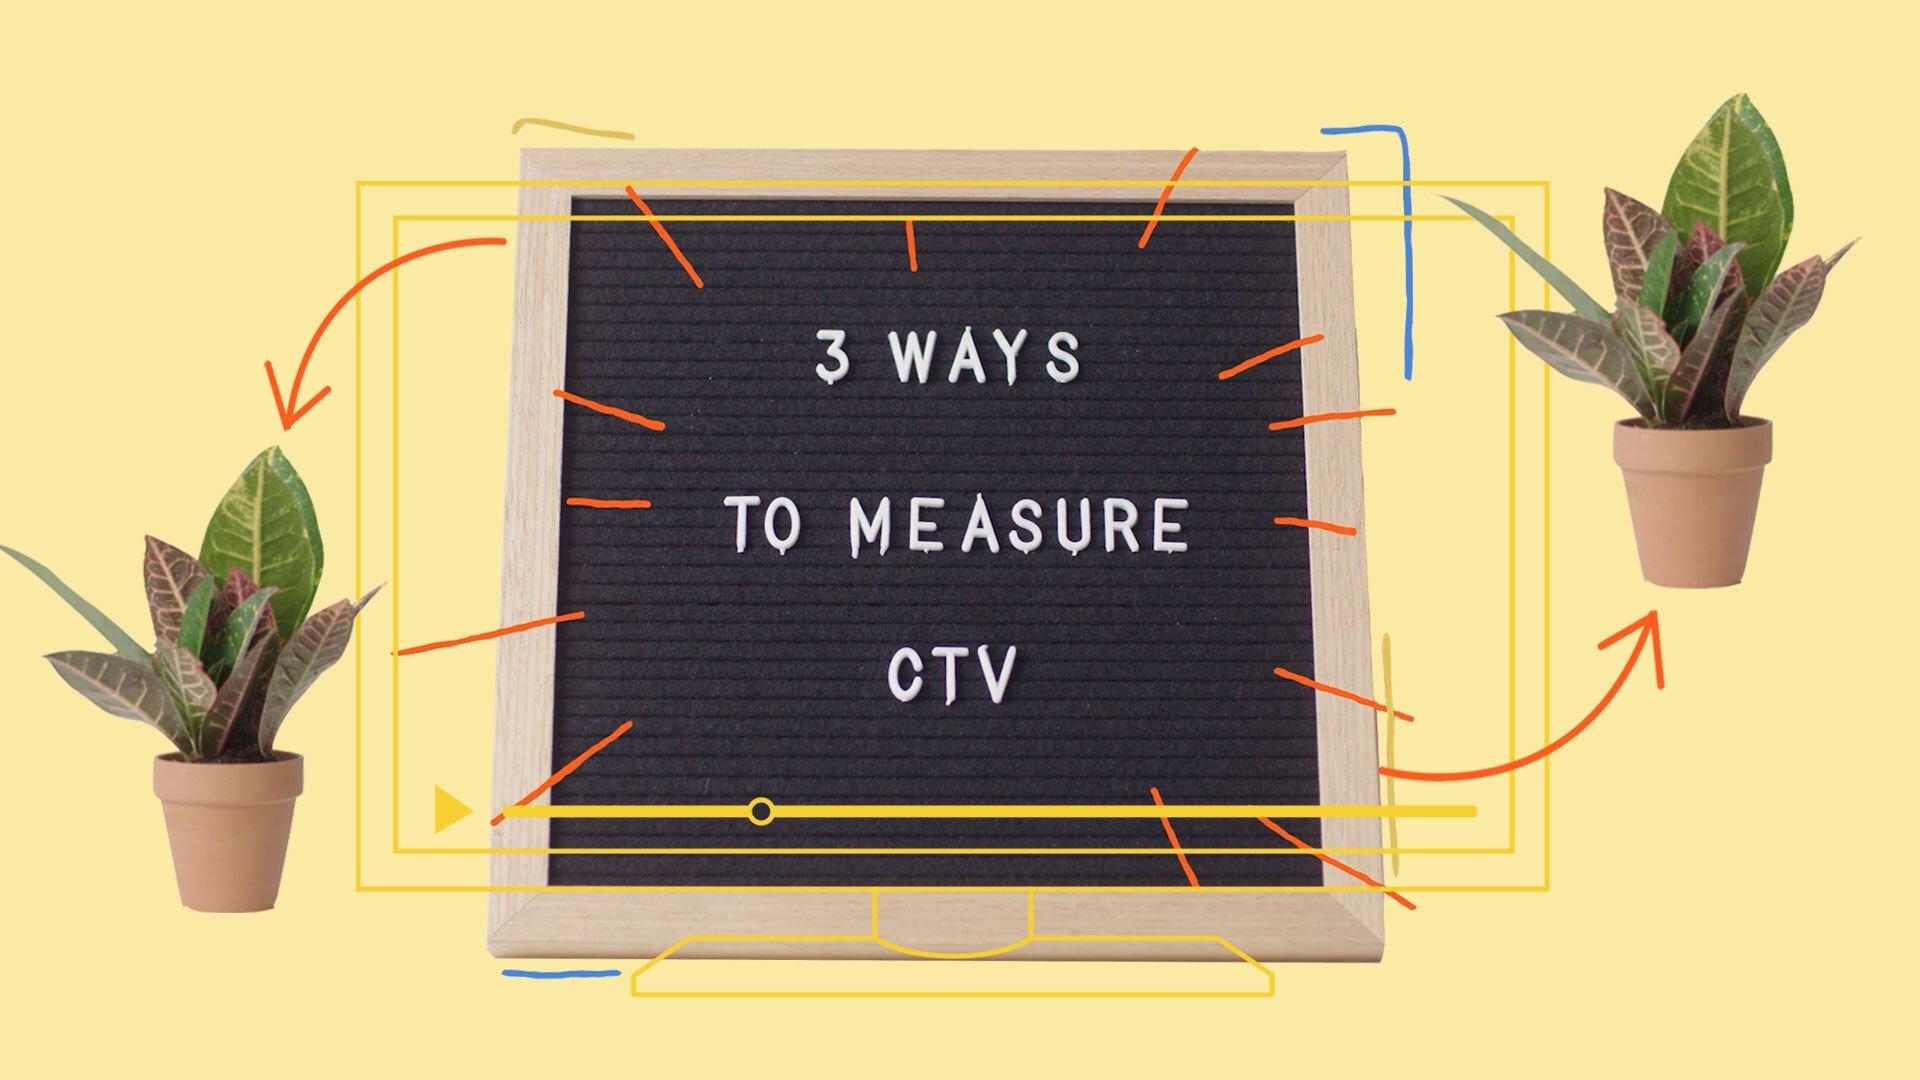 A letter board reads "3 ways to measure CTV"